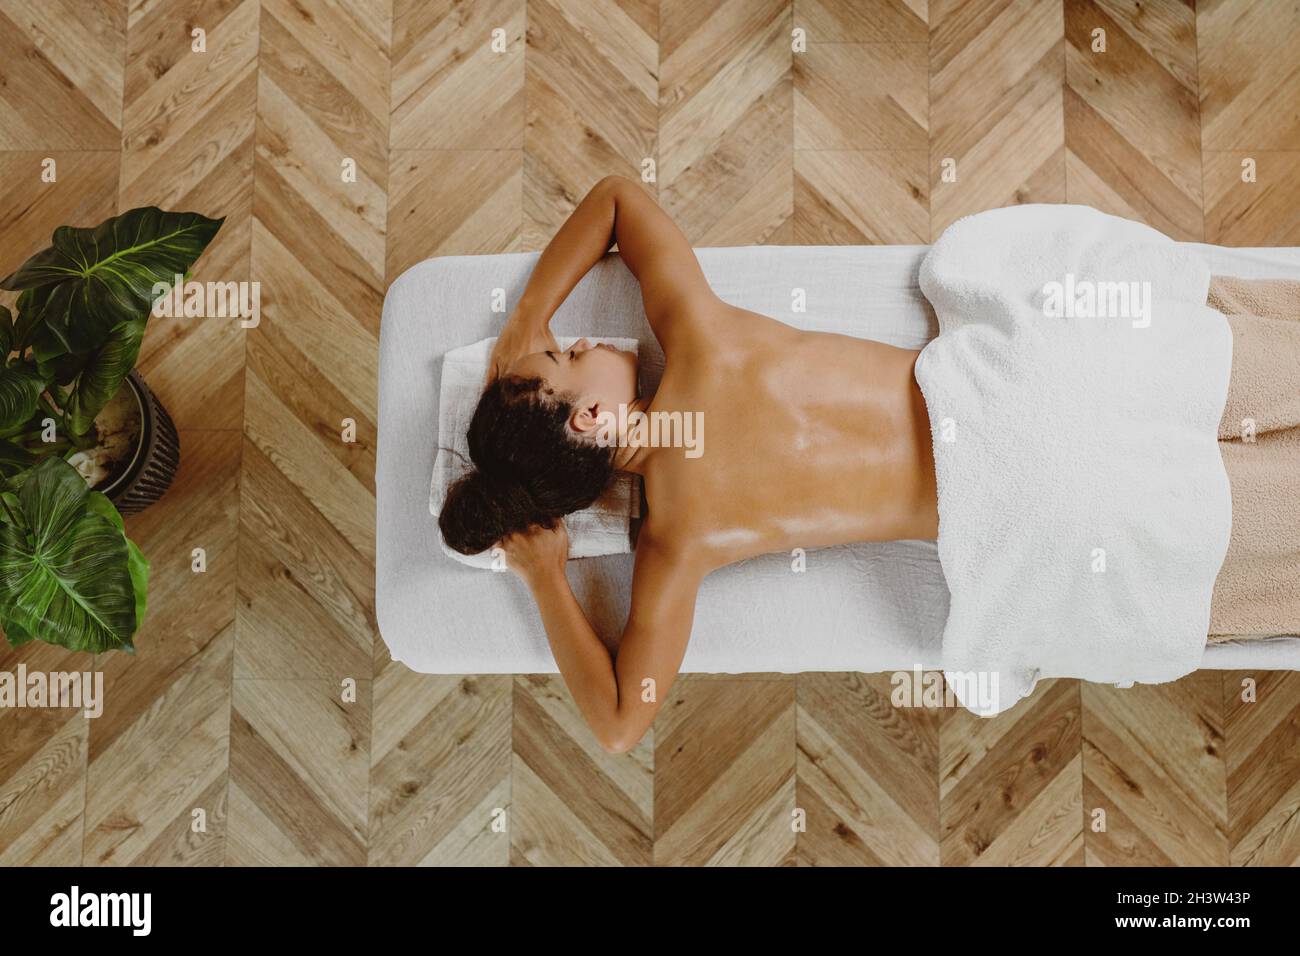 Top view of African American woman lying on massage table. Stock Photo